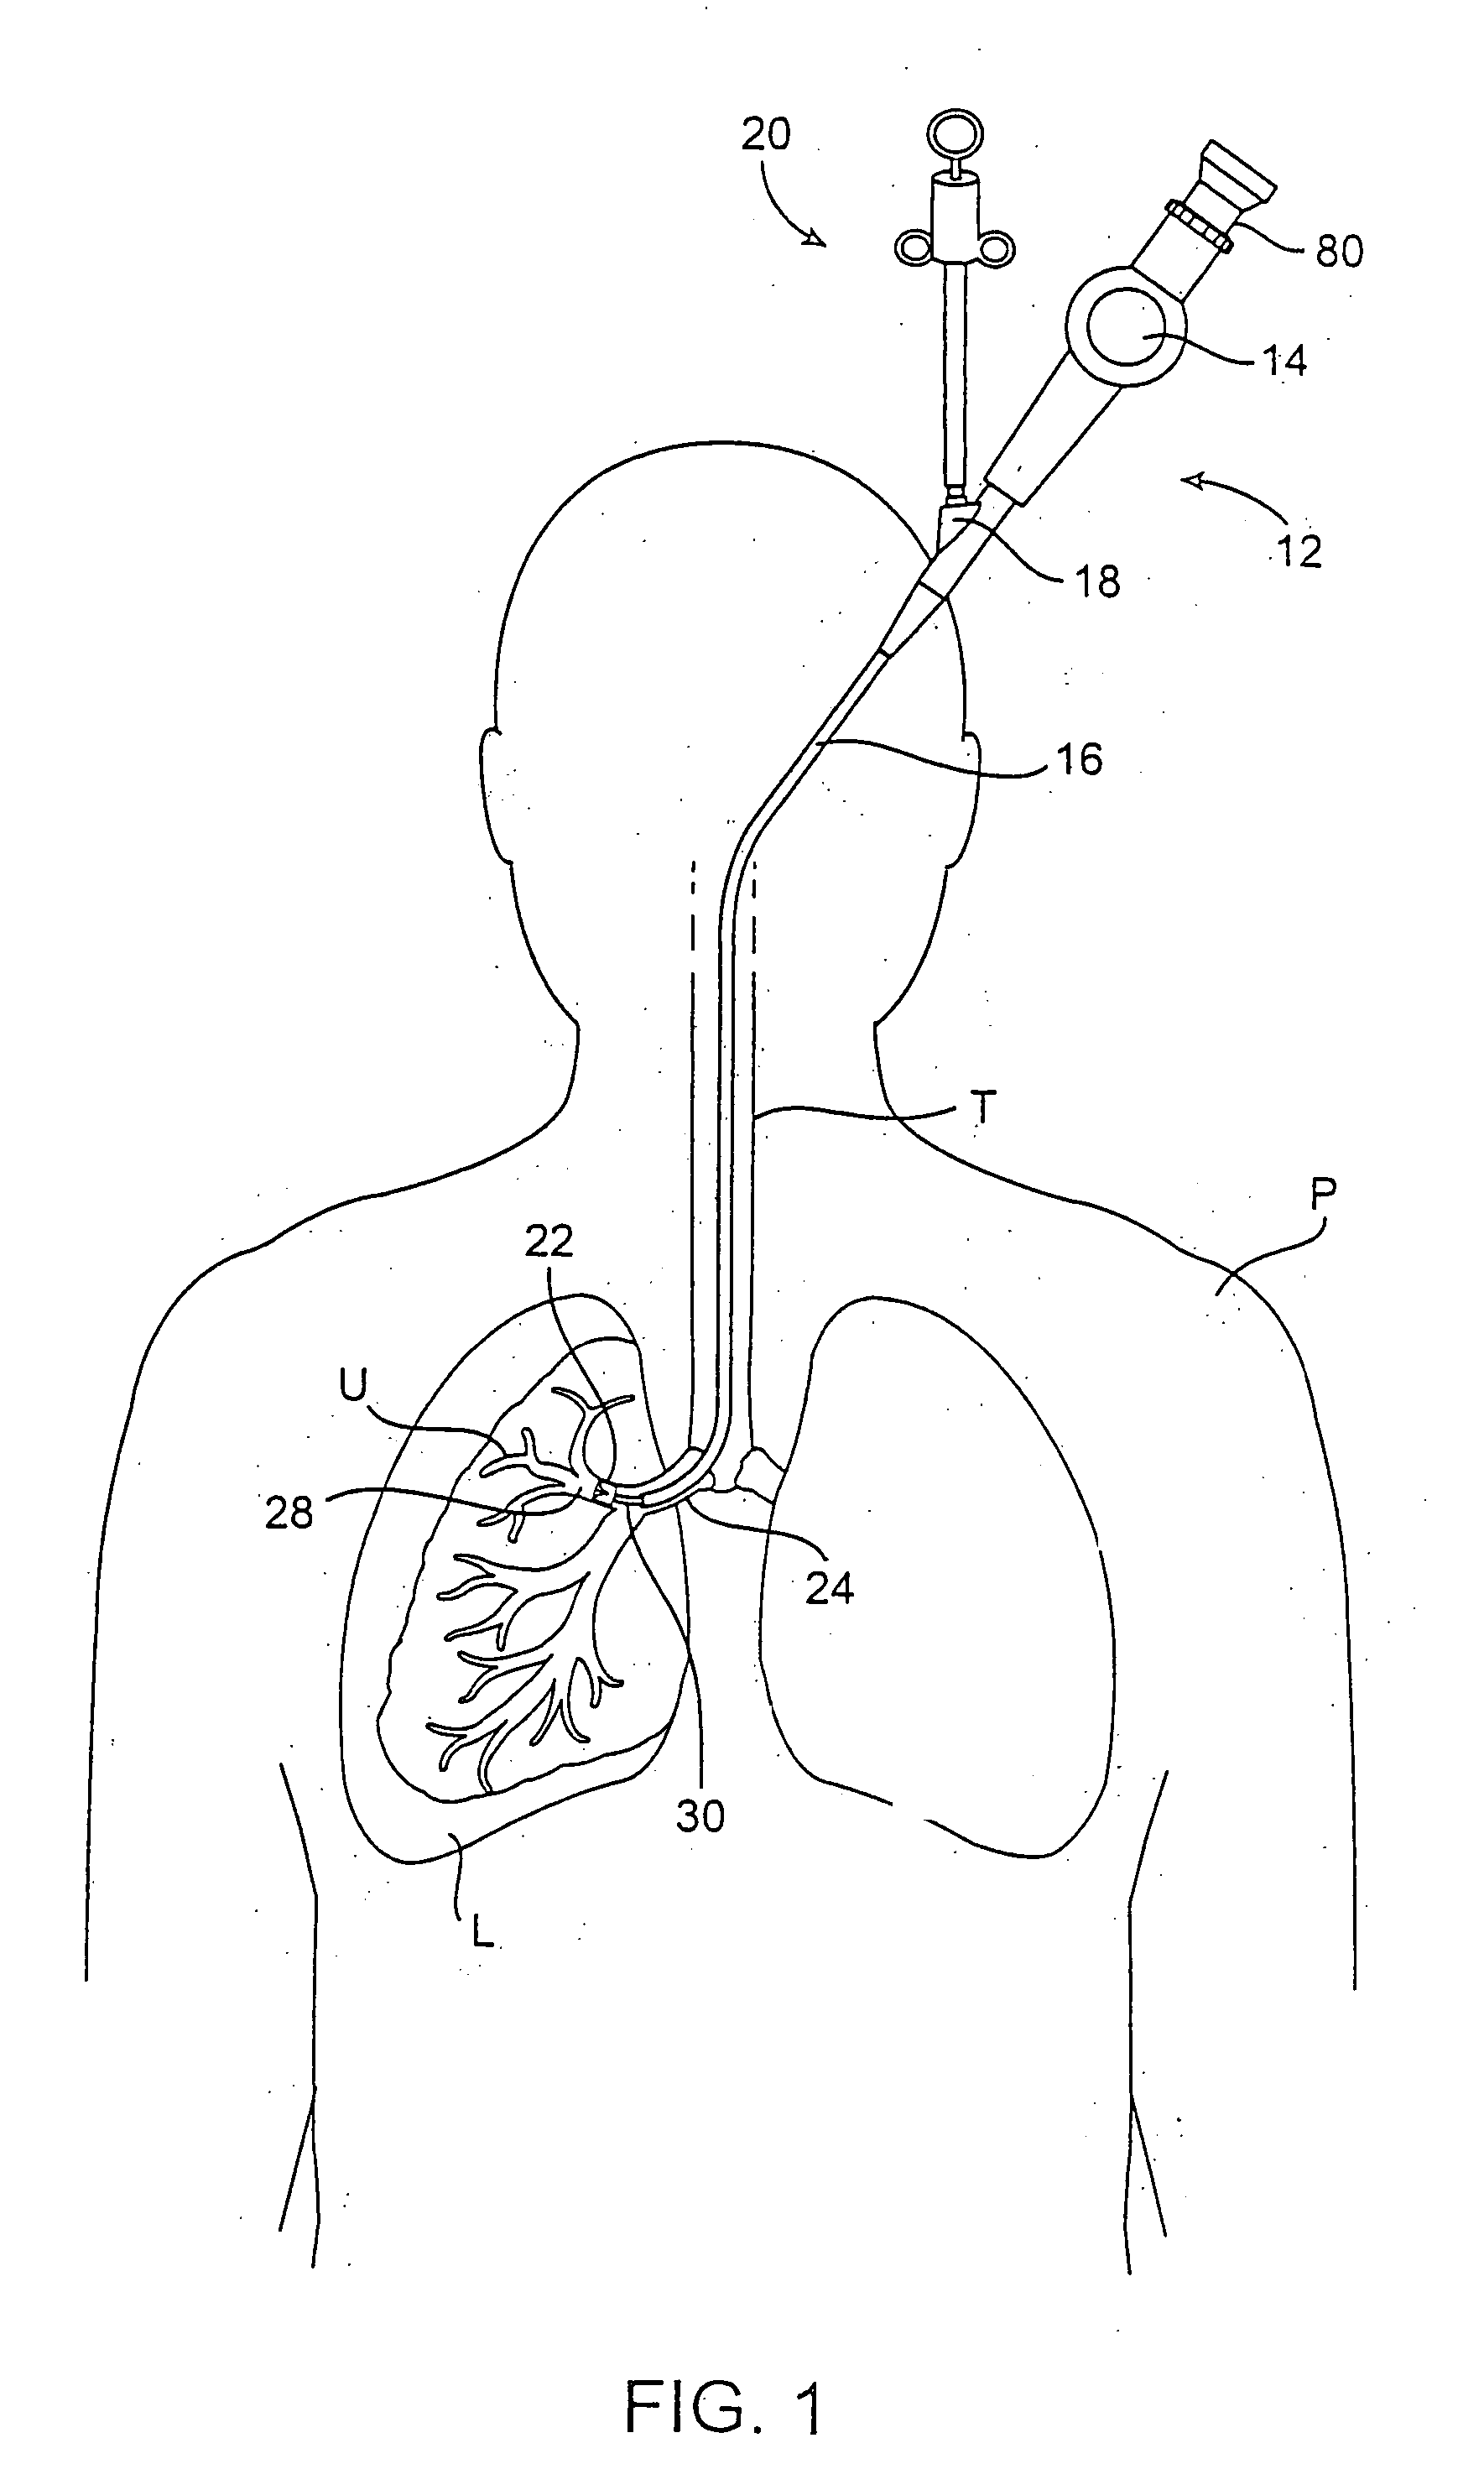 Methods and devices for use in performing pulmonary procedures